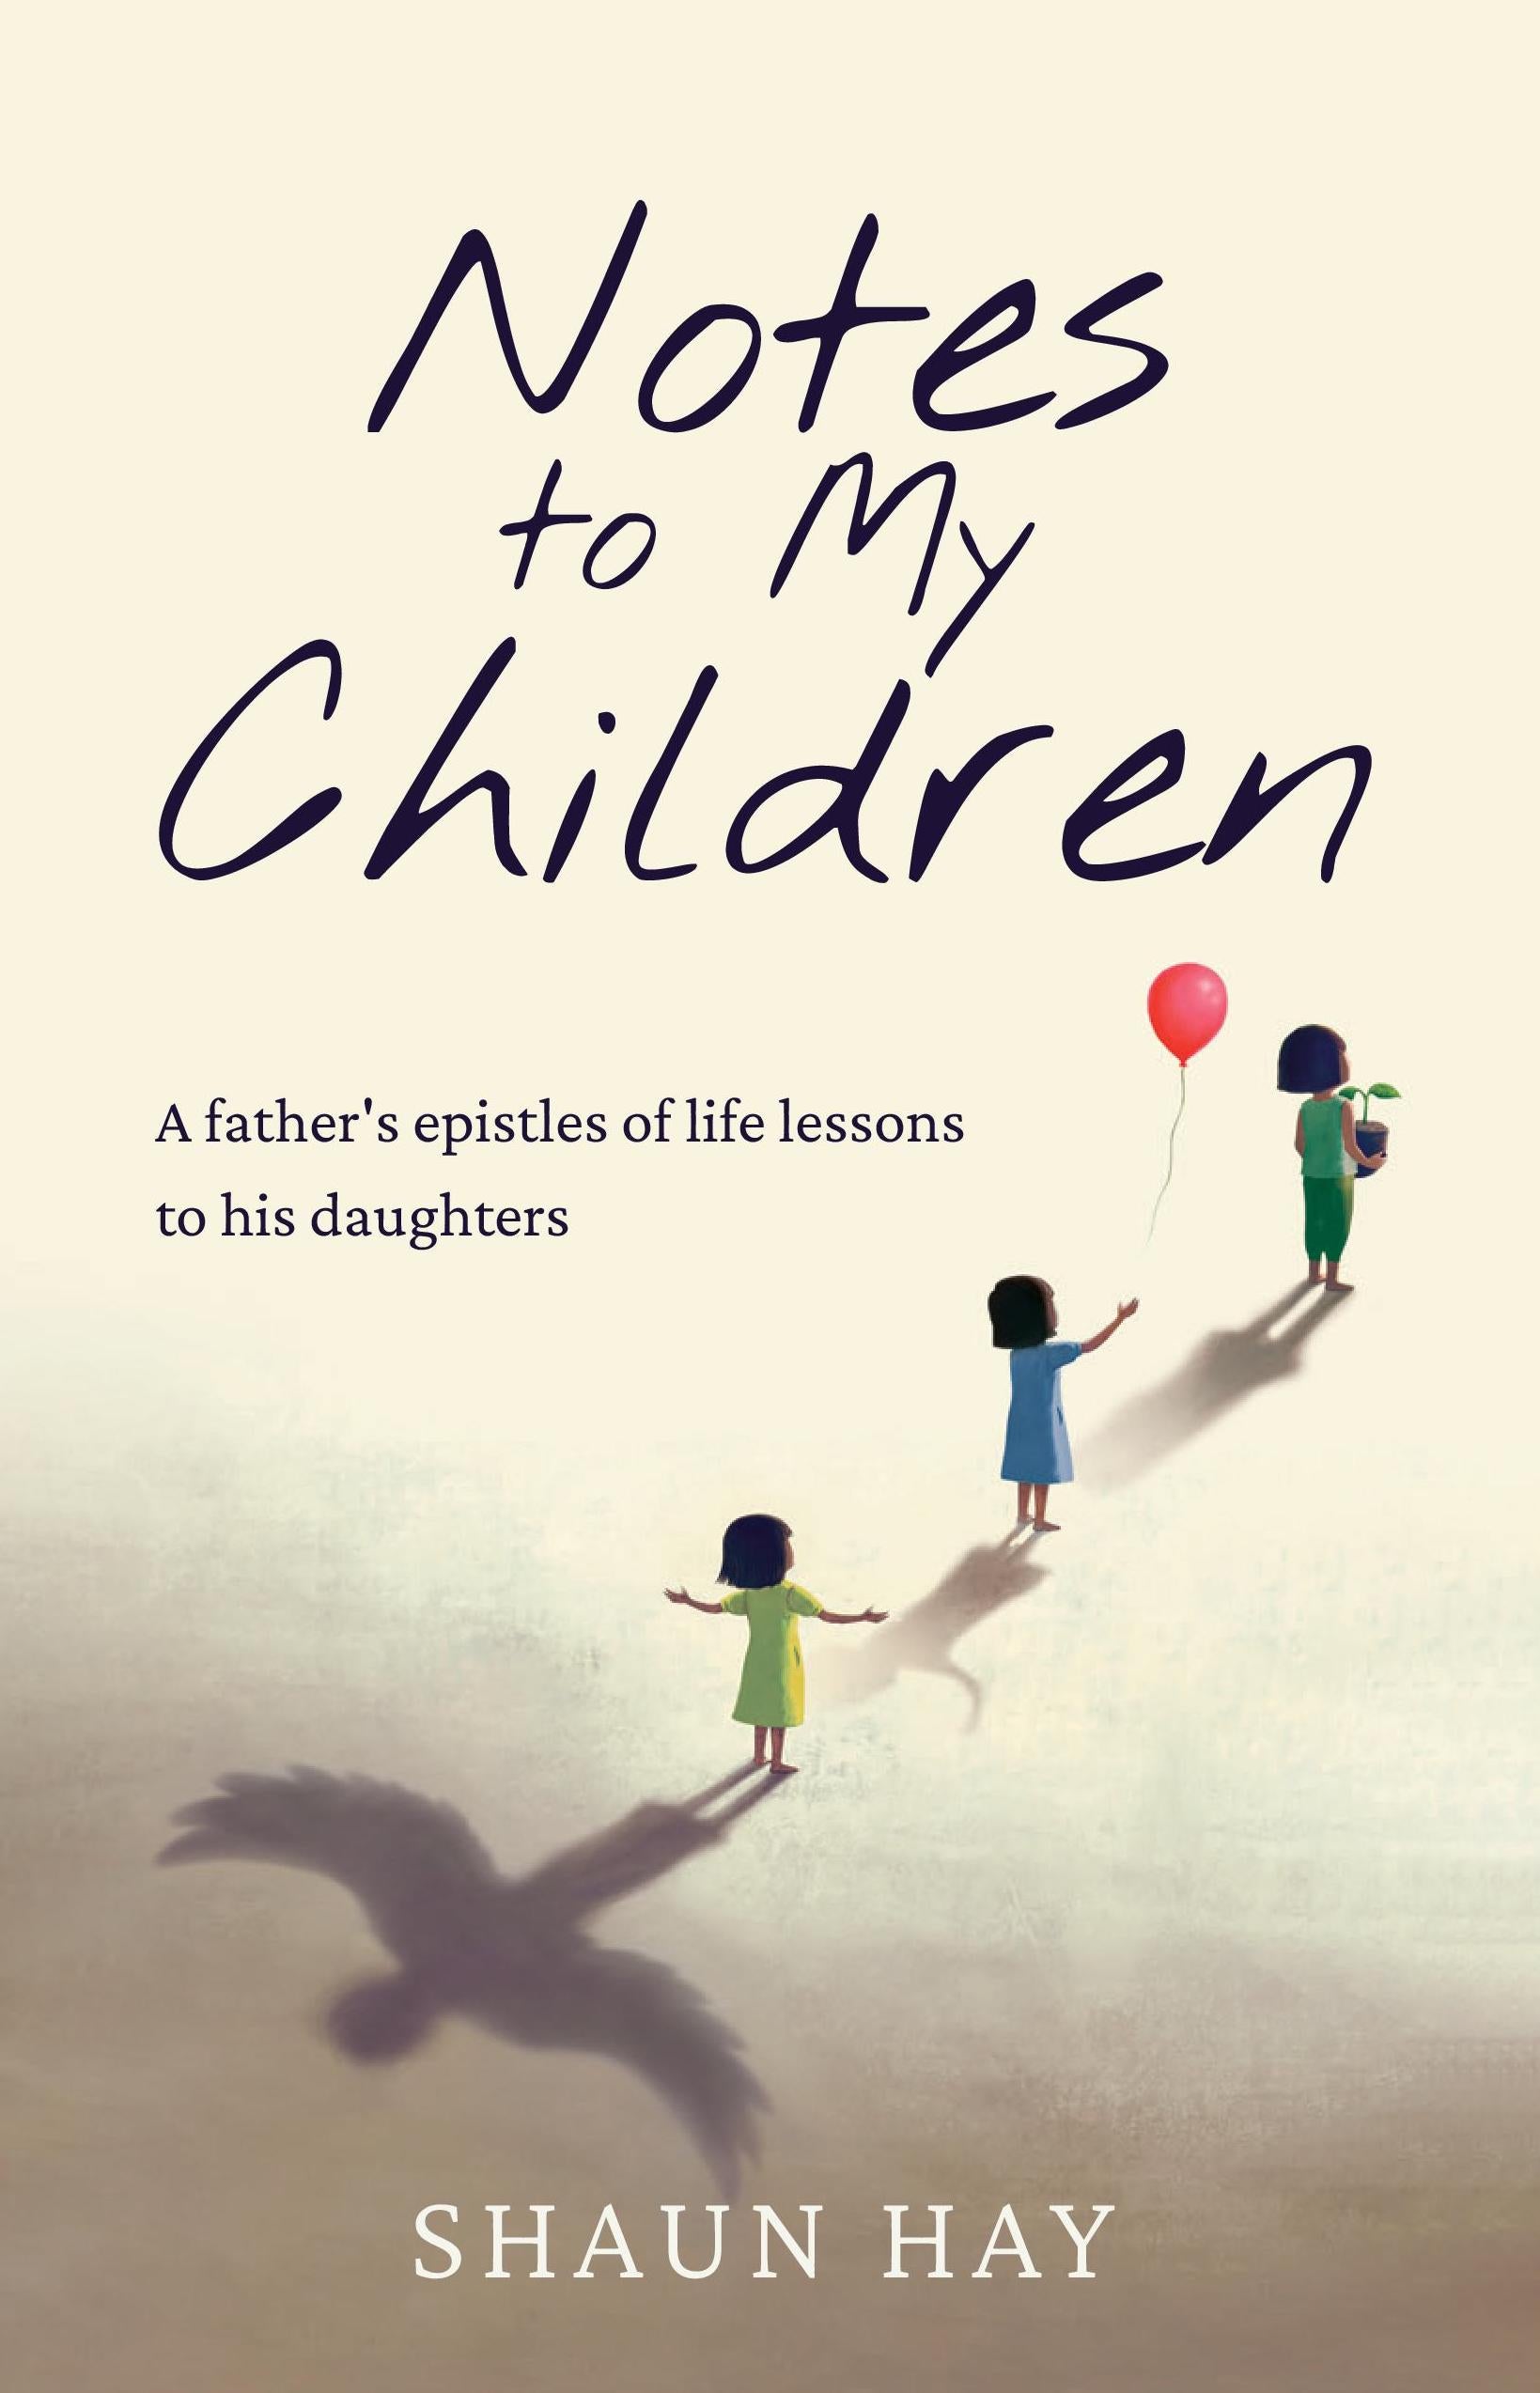 Notes to My Children: A Father’s Epistles of Life Lessons to His Daughters